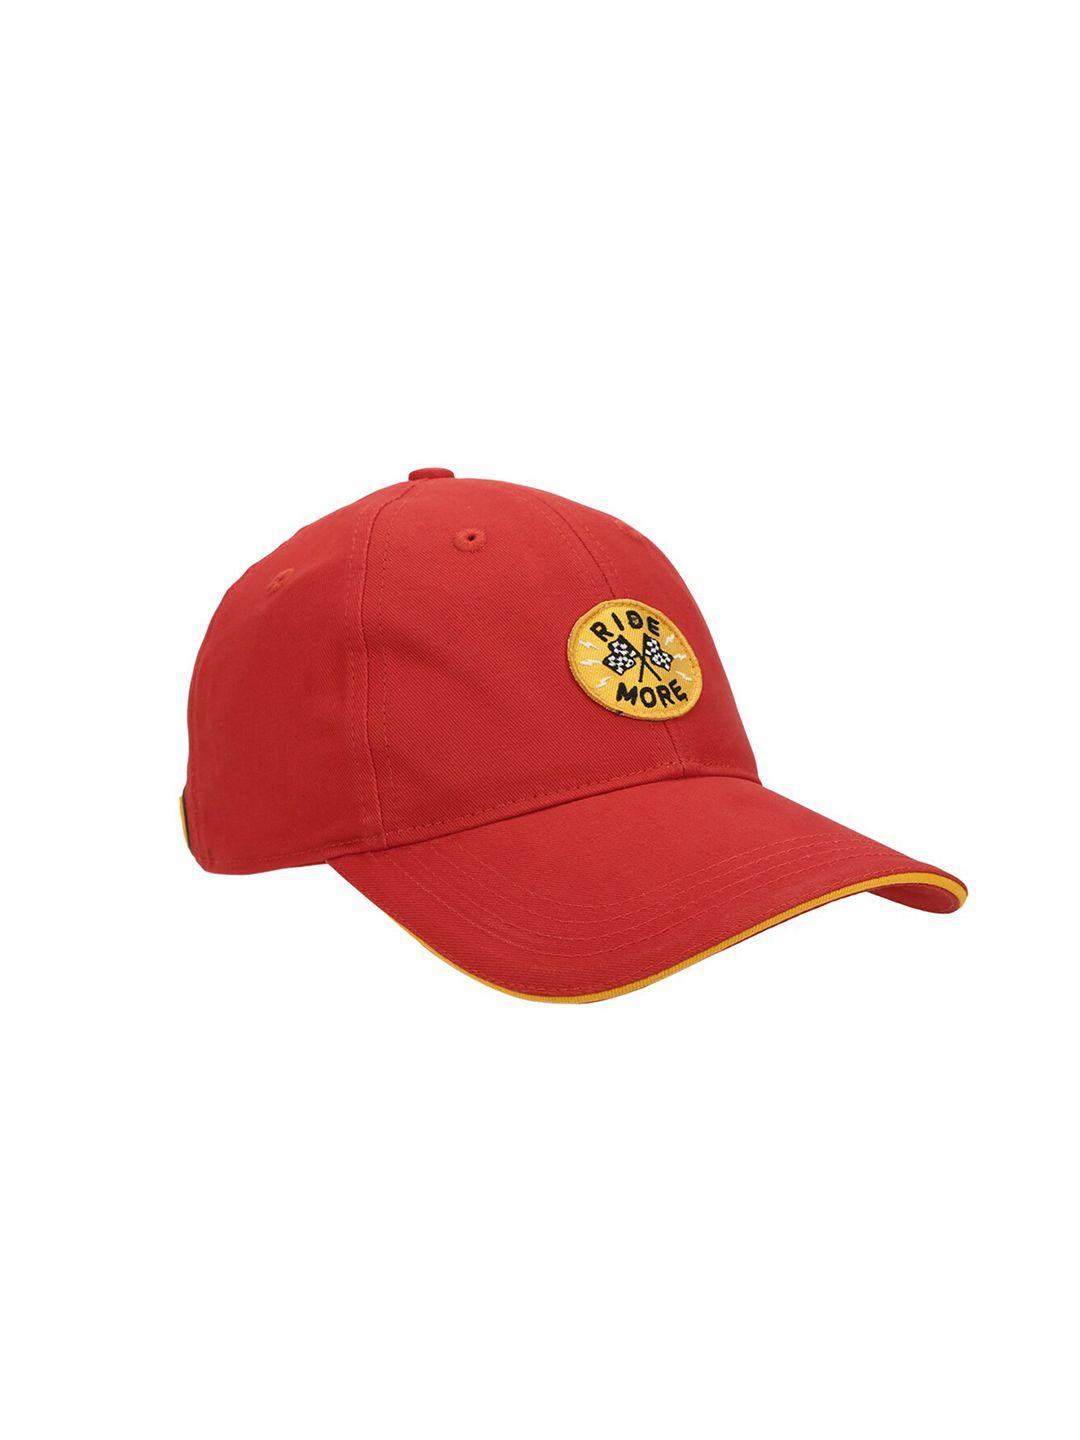 royal enfield unisex red & yellow embroidered baseball cap